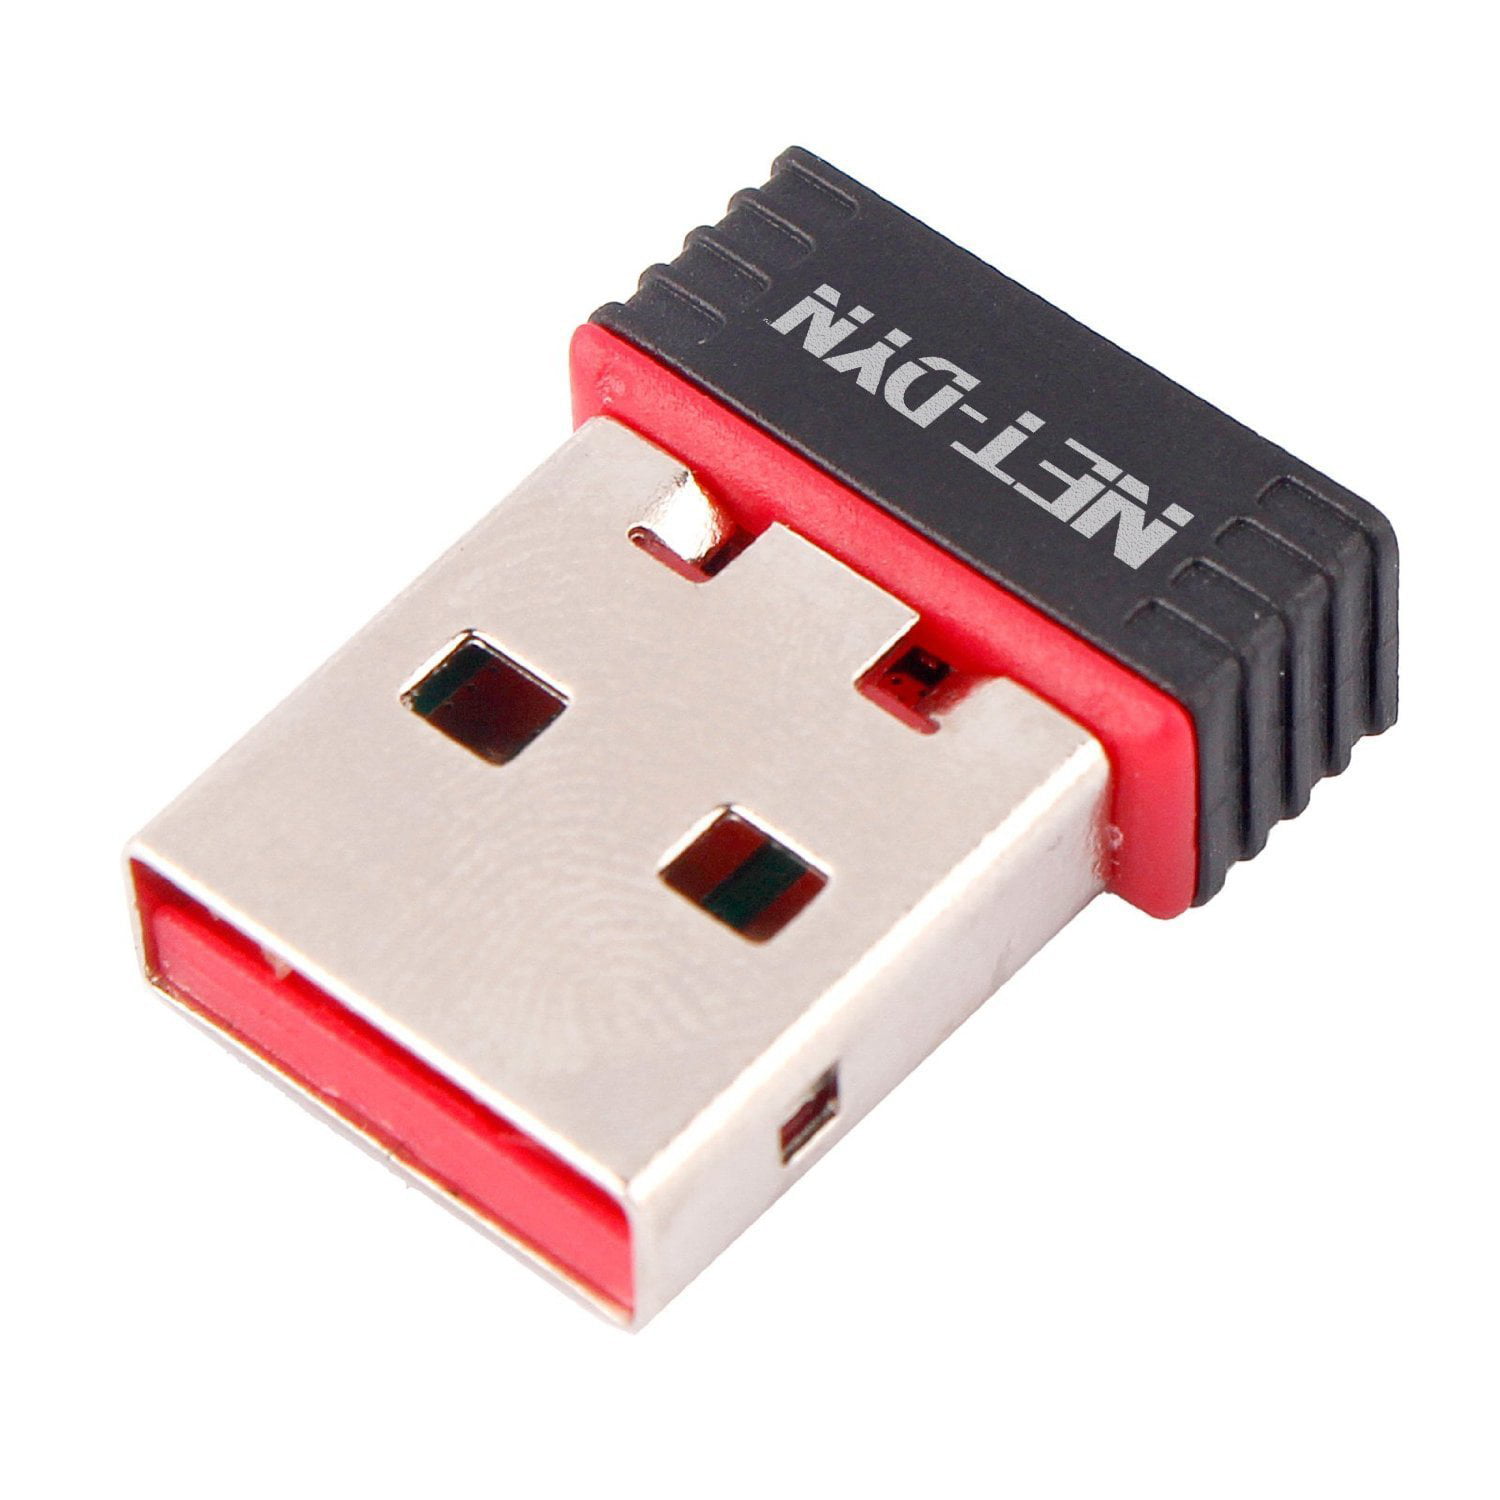 Usb Wifi Adapter 150mbps 802 11n Wireless Internet Dongle For Pc